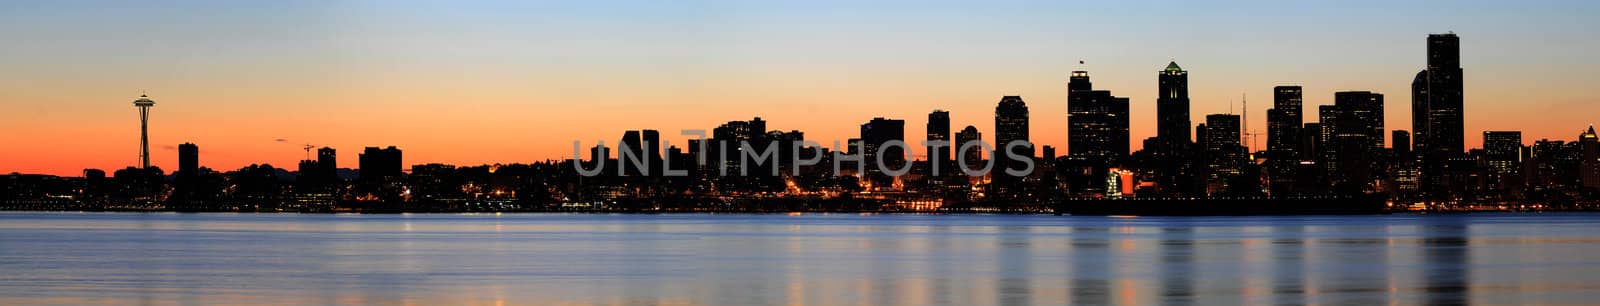 Downtown Skyline and Puget Sound at Sunrise Panorama